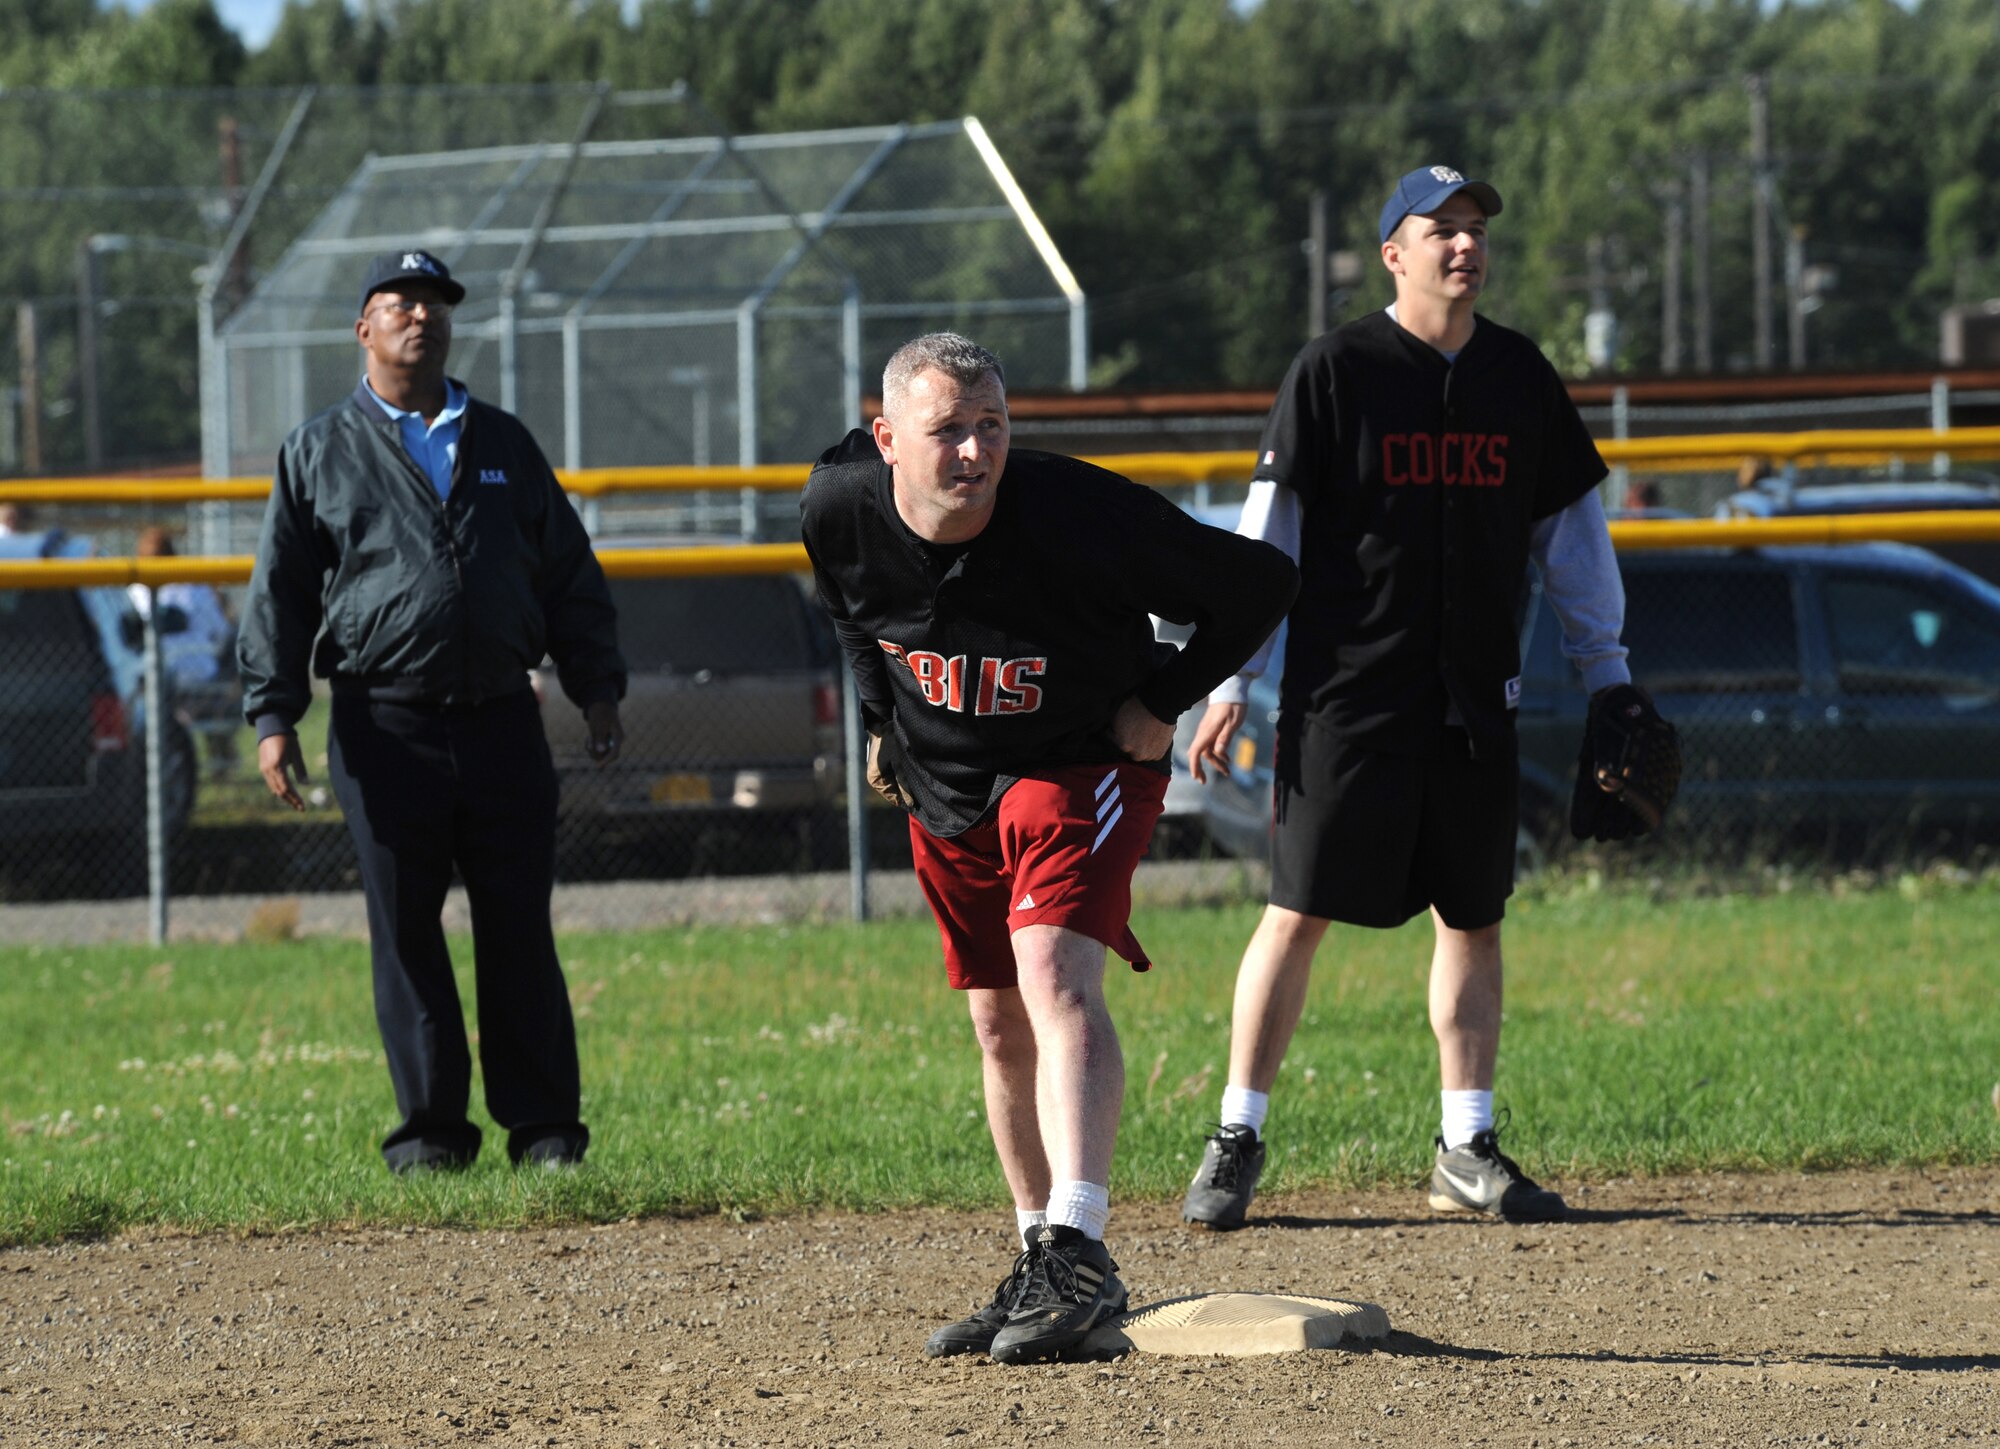 ELMENDORF AIR FORCE BASE, Alaska -- Senior Airman Morgan Nicholaus, 381st Intelligence Squadron, prepares to lead off Wednesday August 6.The 381st IS went head to head with the 19th Fighter Squadron Gamecocks in a bid for the Intramural Softball Championship game. The 381st IS won the championship game finishing the season with a record of 10-1. (U.S. Air Force photo/Airman 1st Class Matthew Owens)